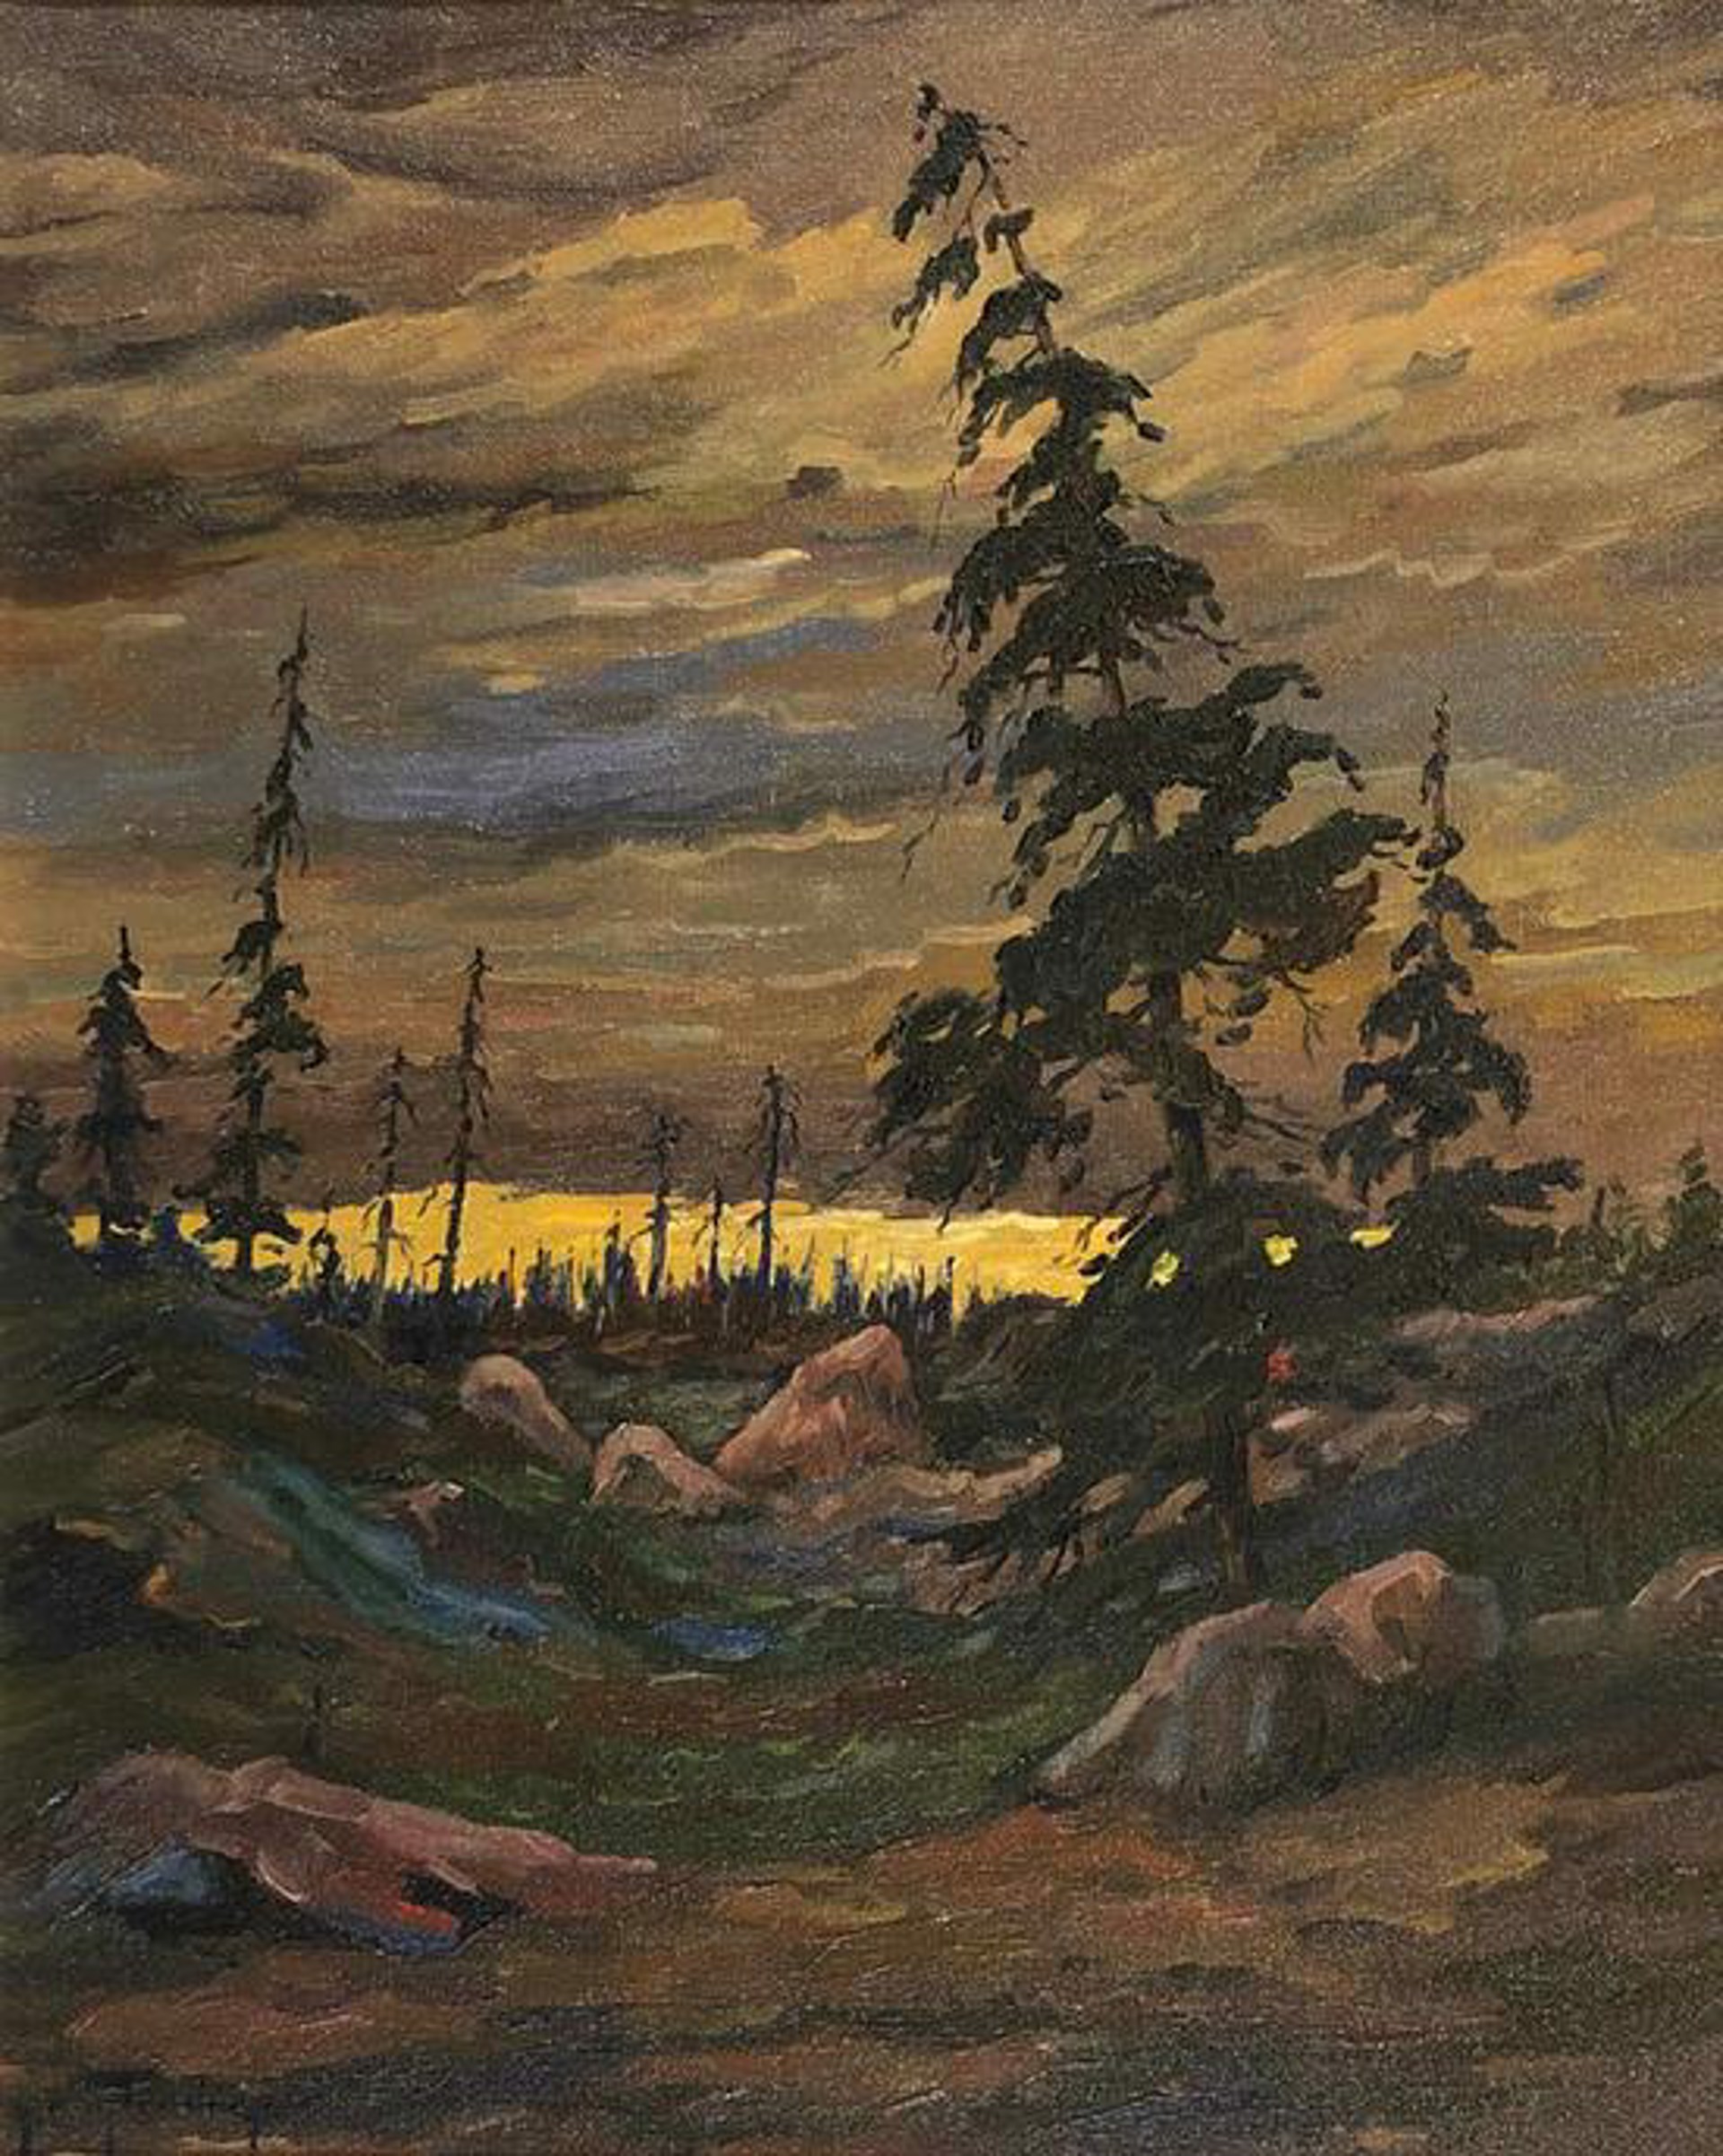 Pine Country by George Buytendorp (1923-2014)